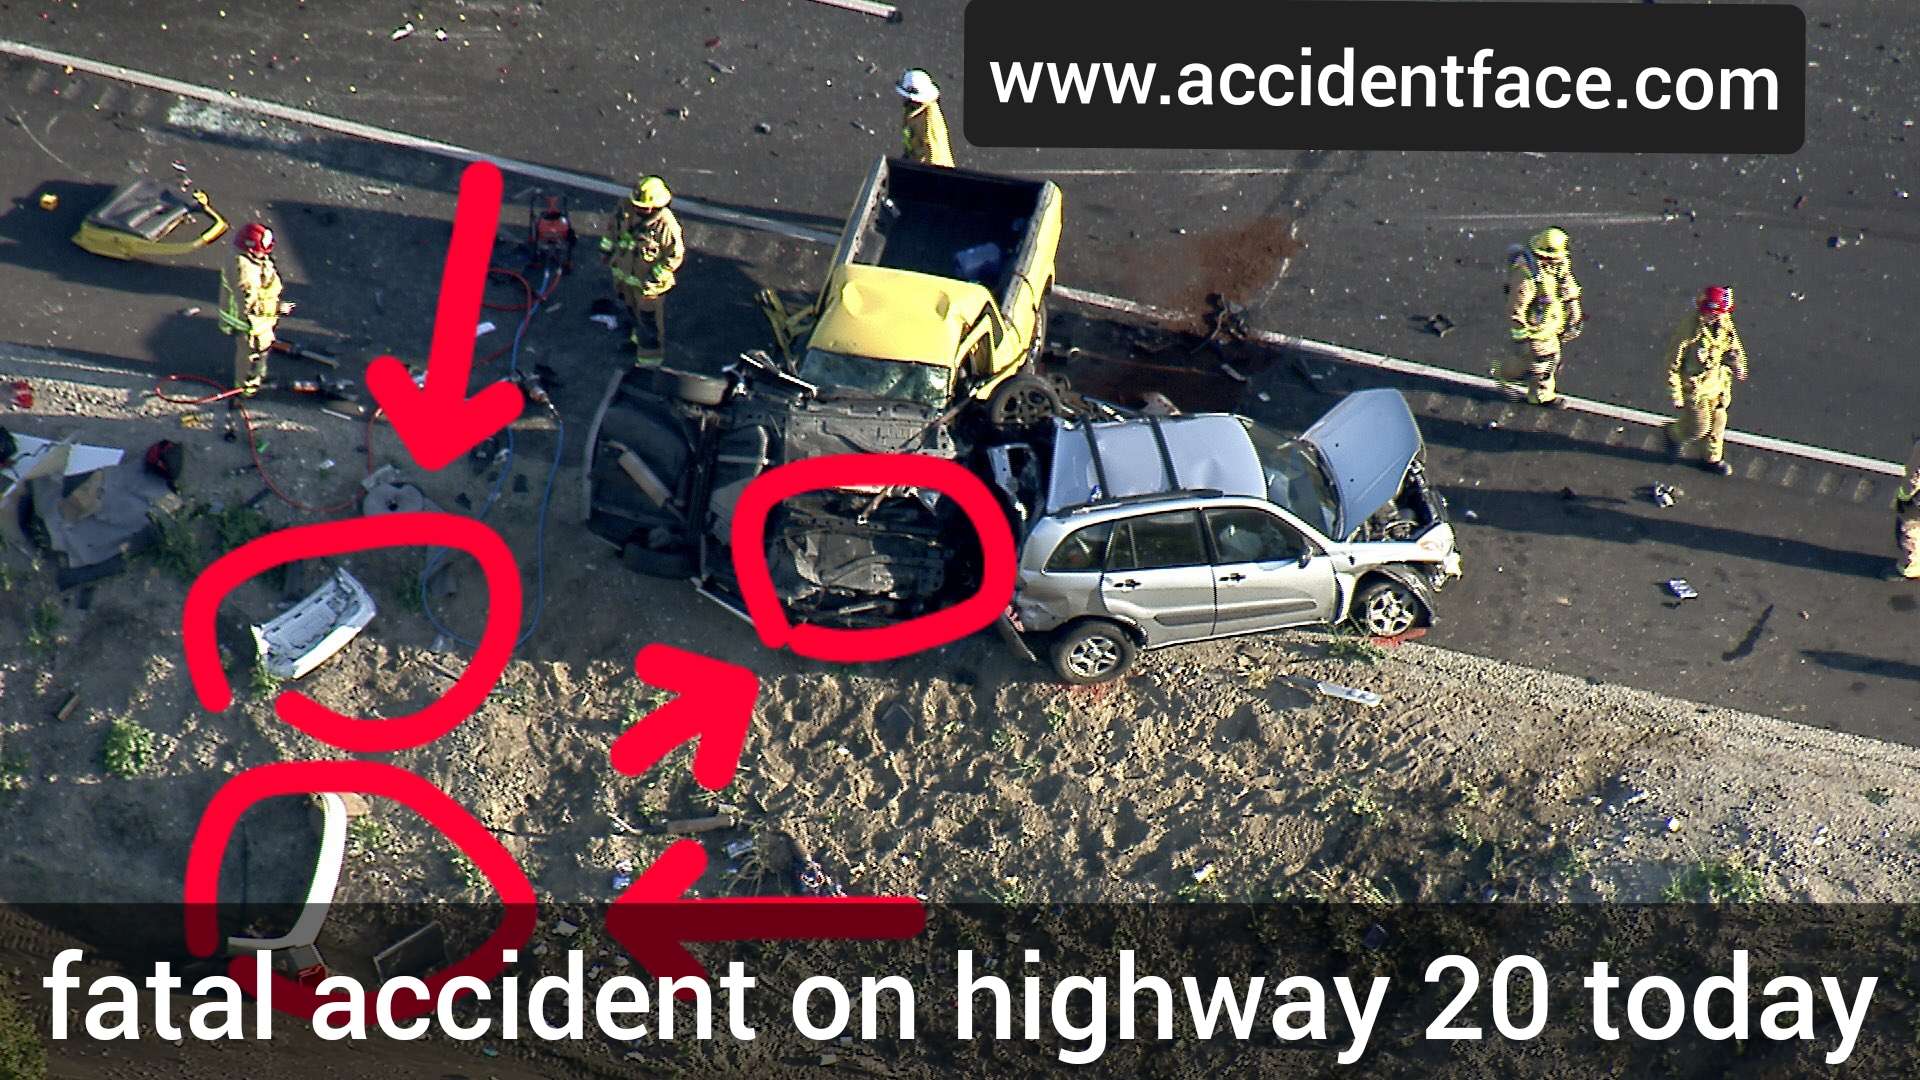 Fatal accident on highway 20 today